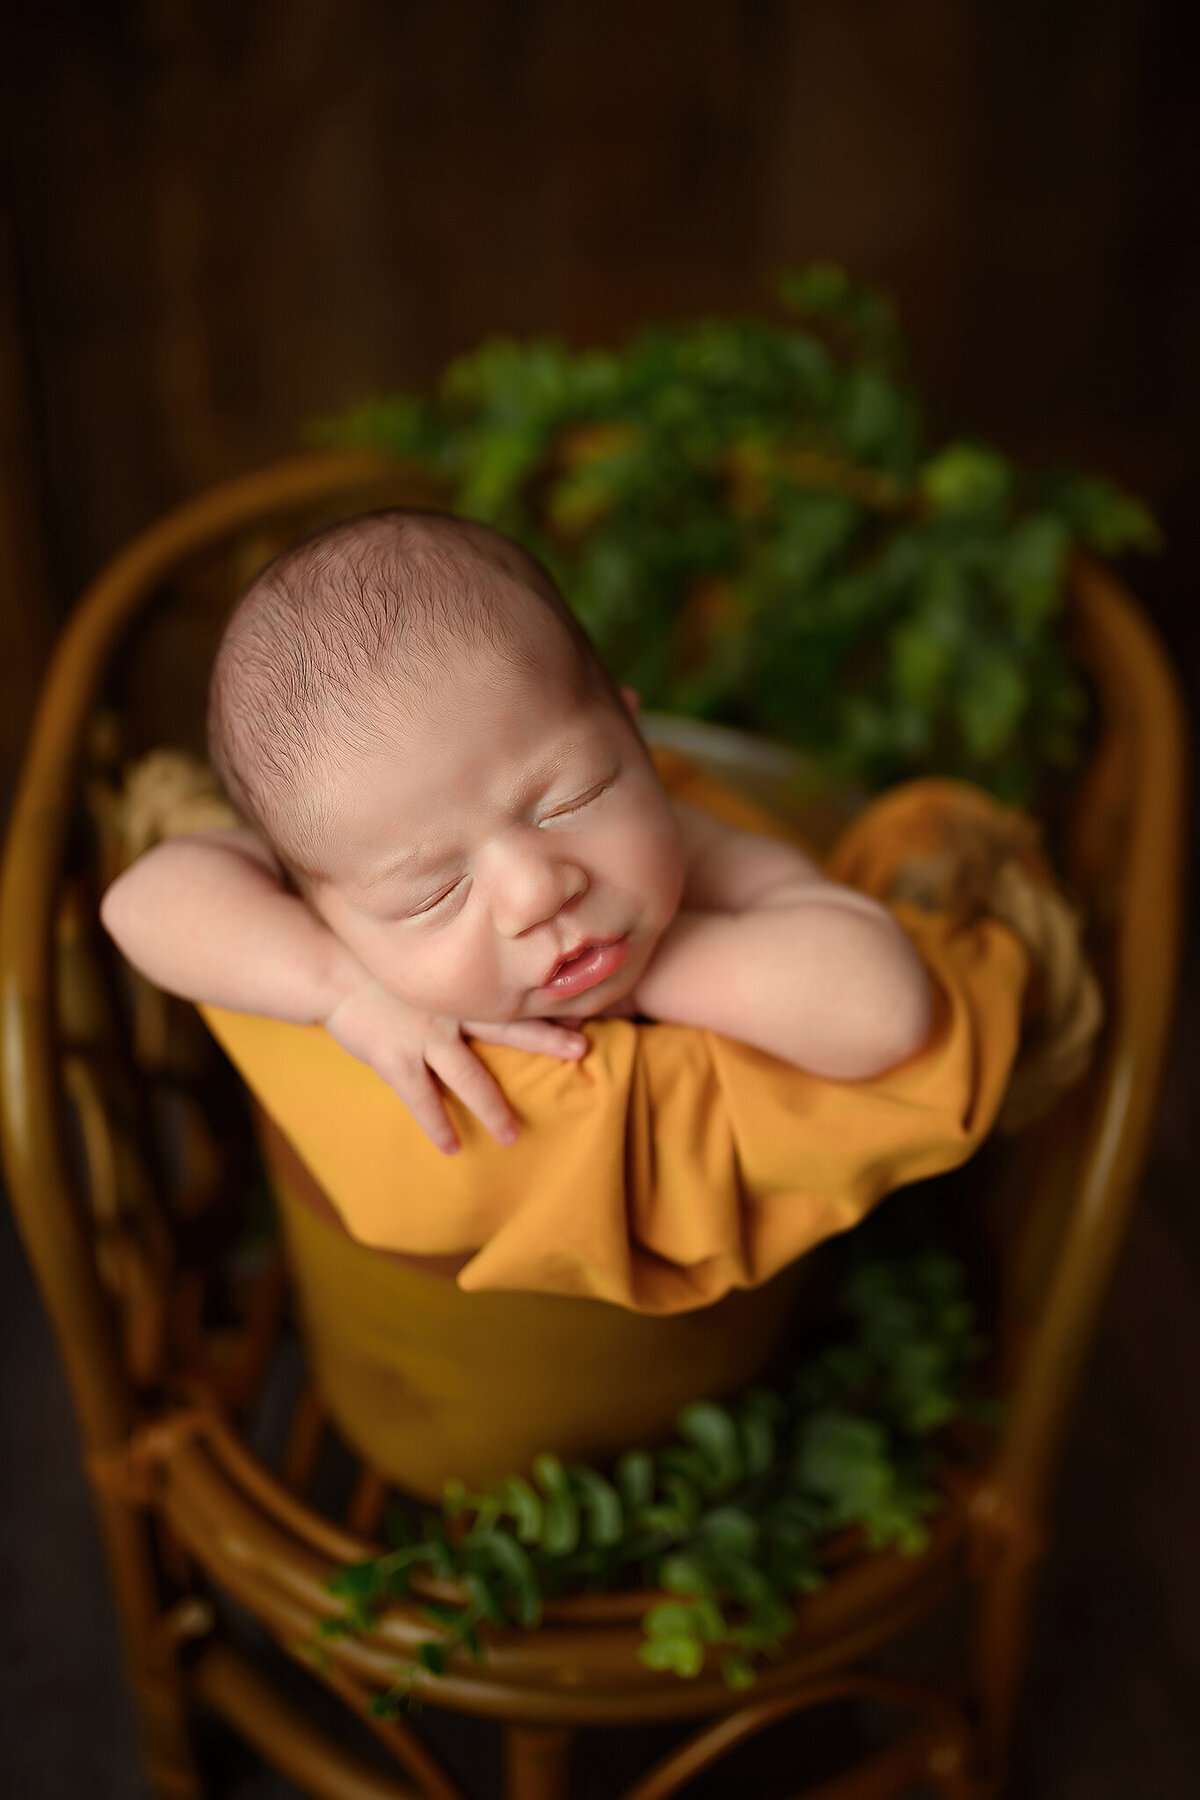 baby boy posed in a bucket on a bamboo chair with green foliage and wood background